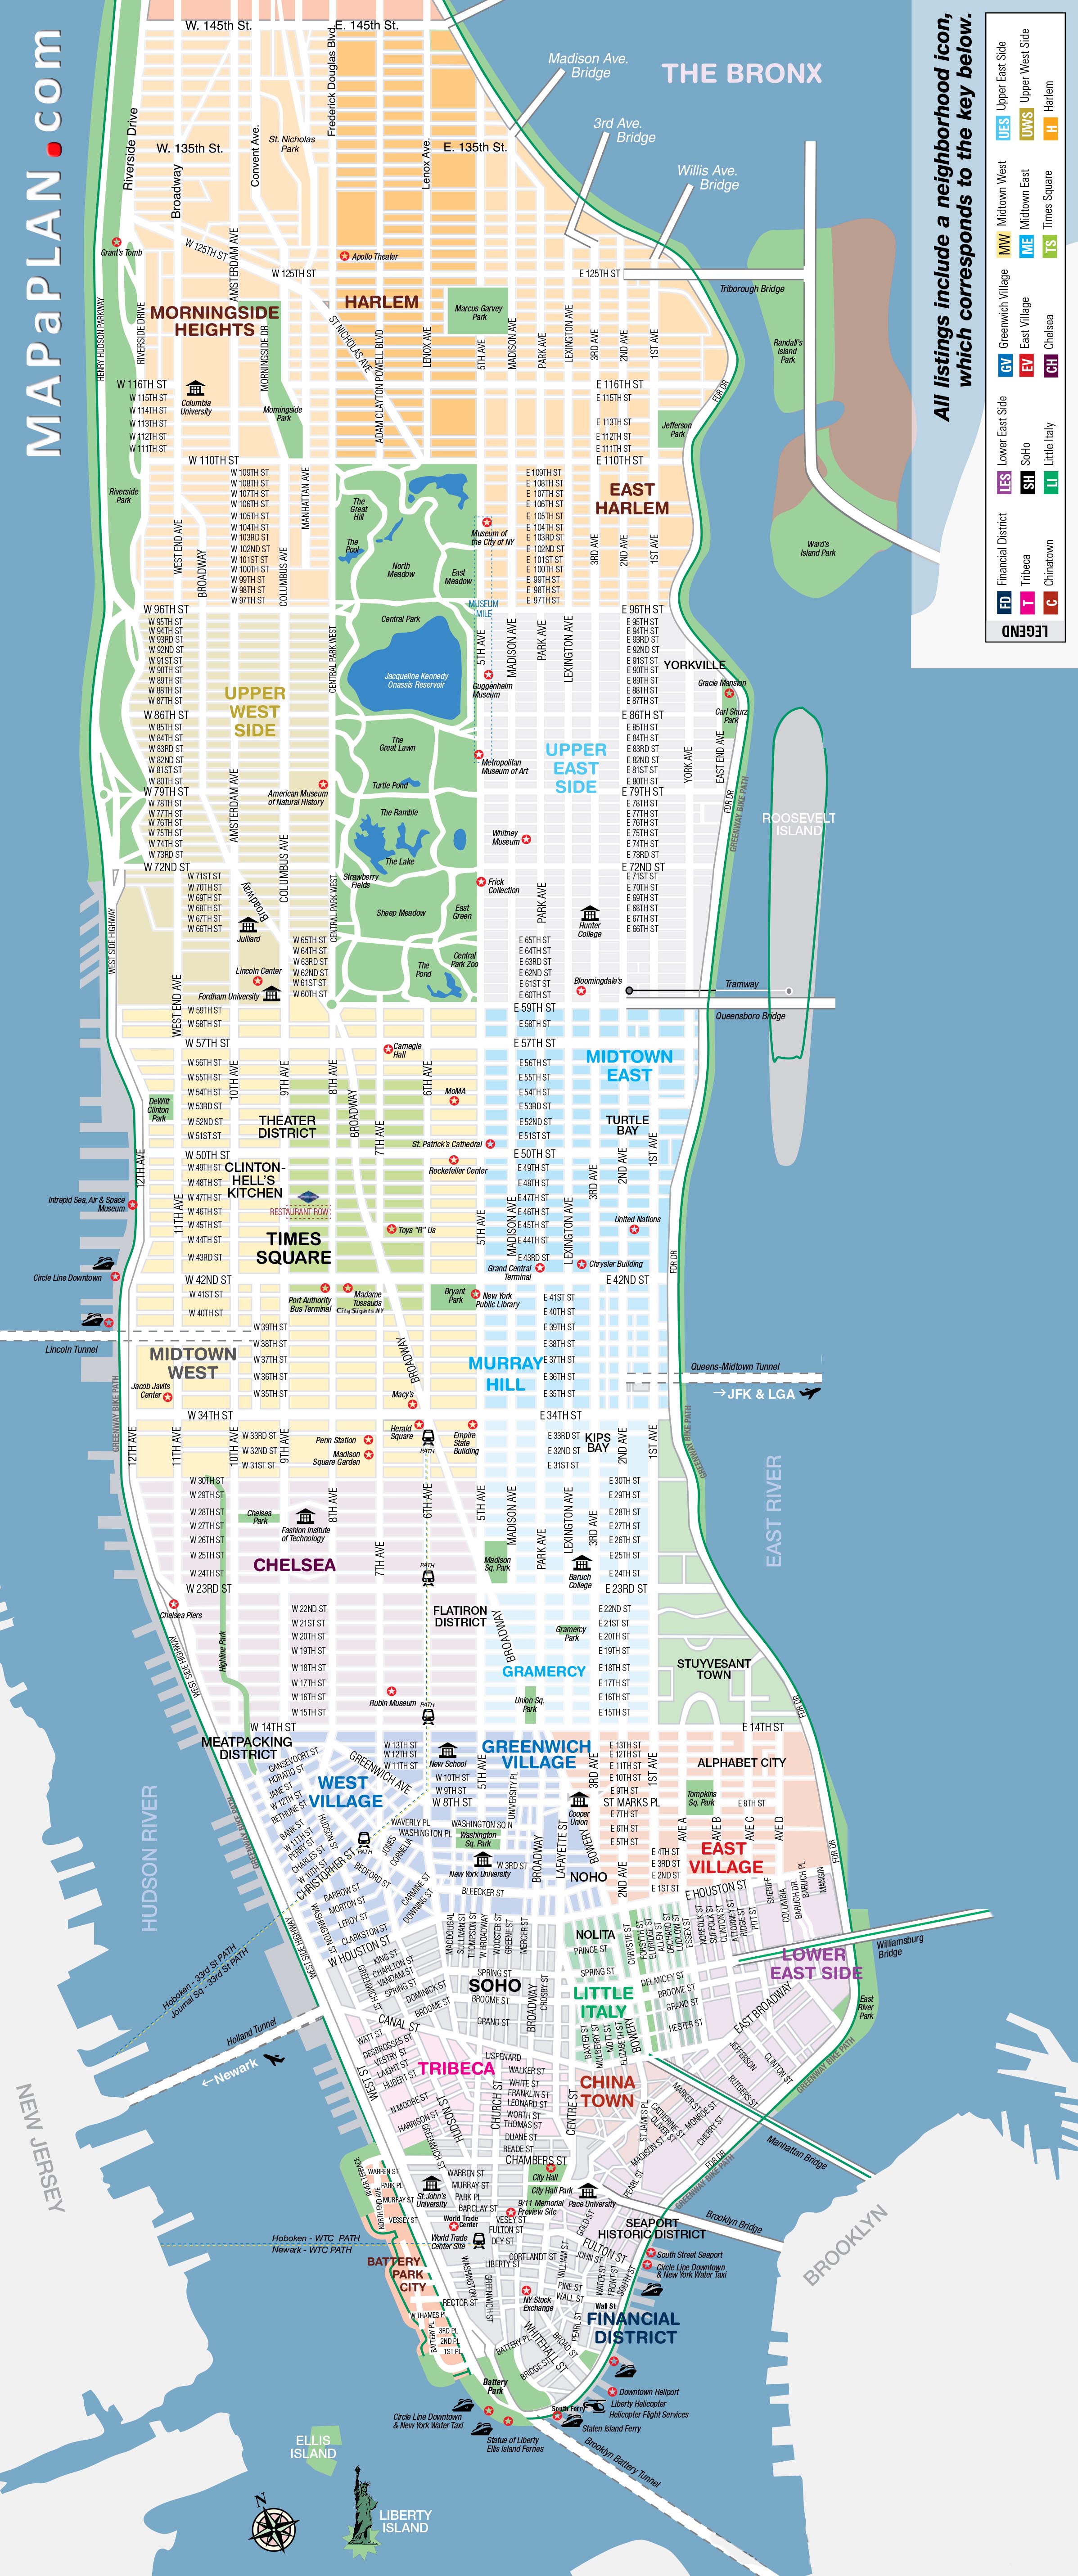 Large Printable Tourist Attractions Map Of Manhattan New York